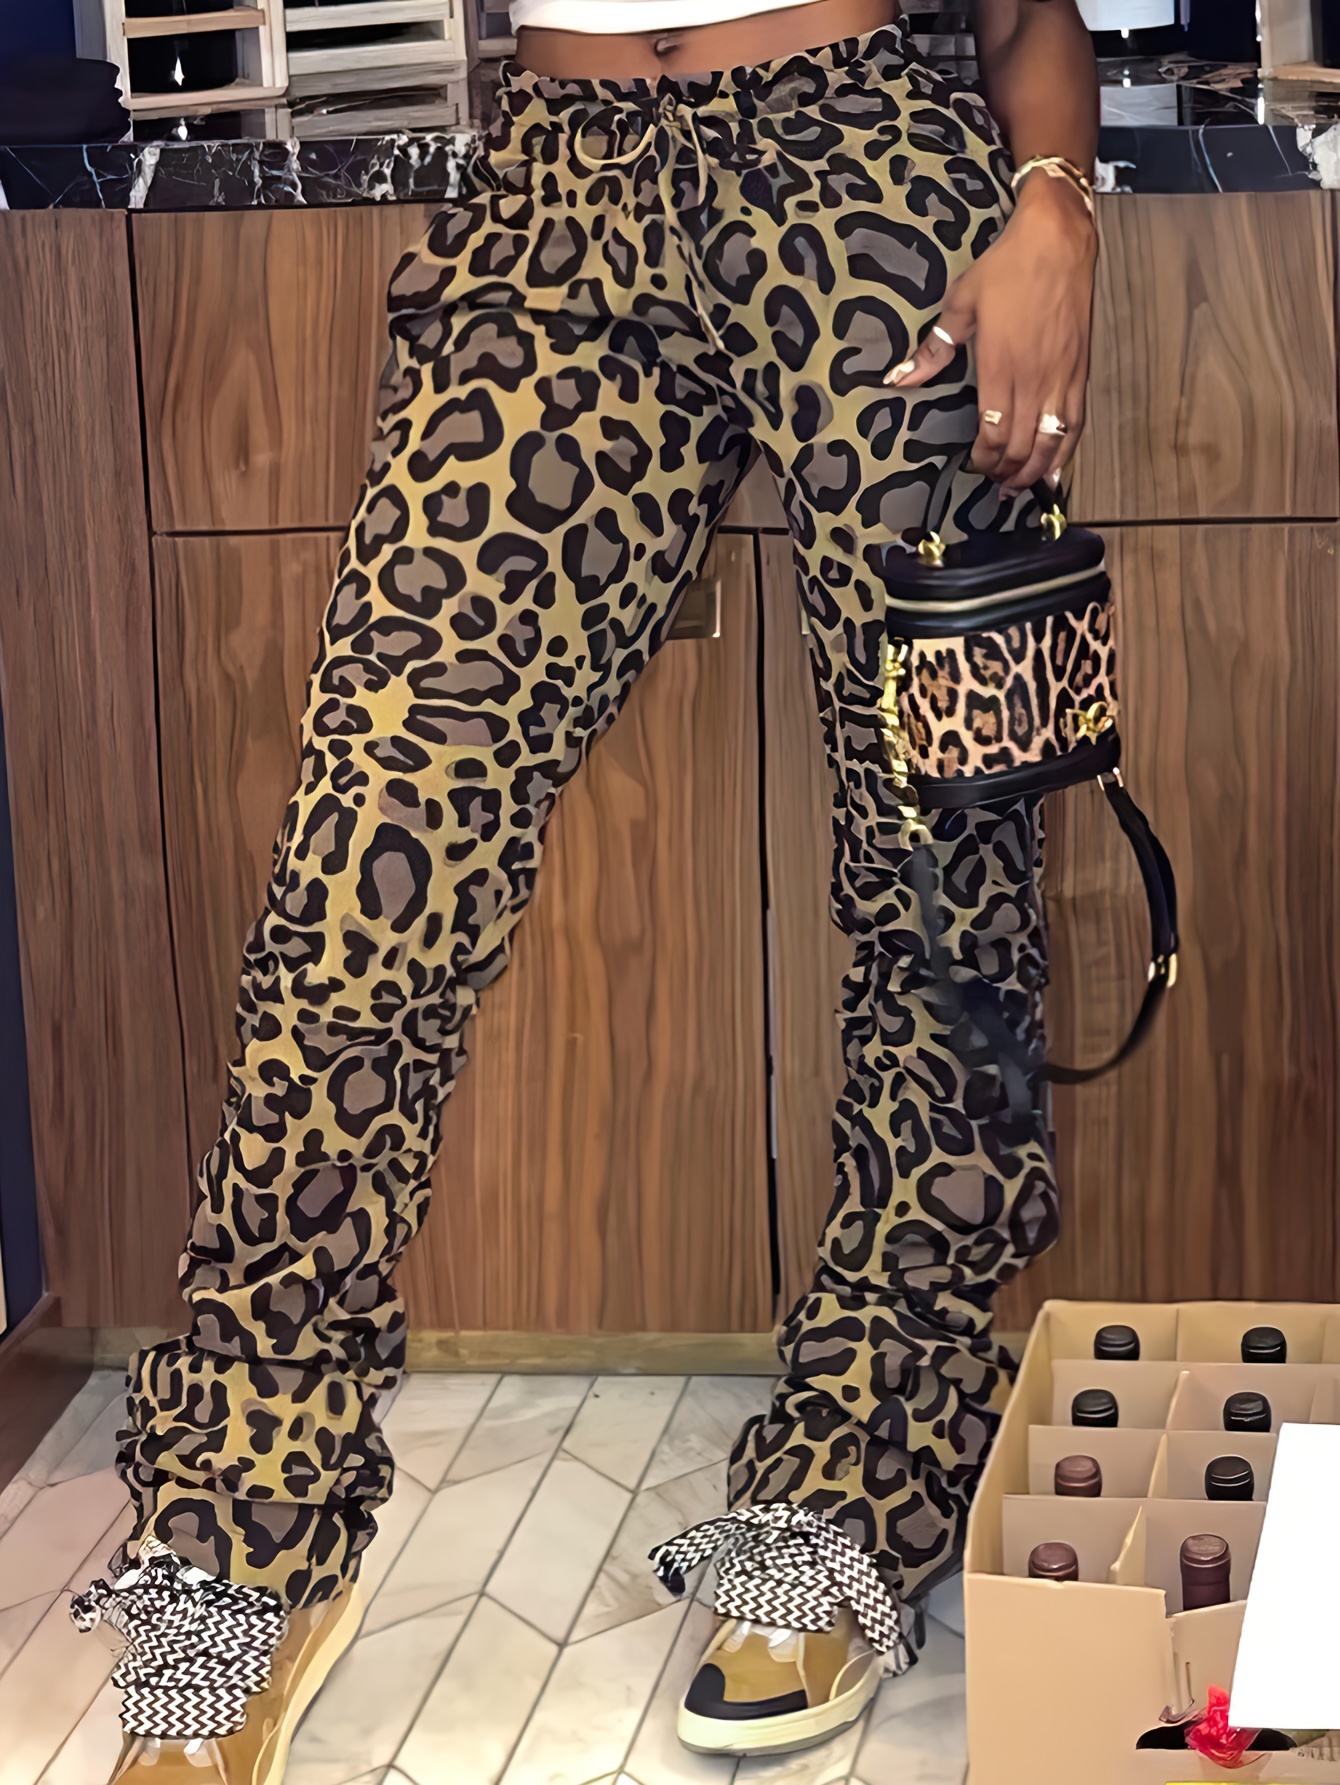 Leopard Print Paper Bag Waist Cropped Pants, Casual Elastic Waist Belted  Pants, Women's Clothing